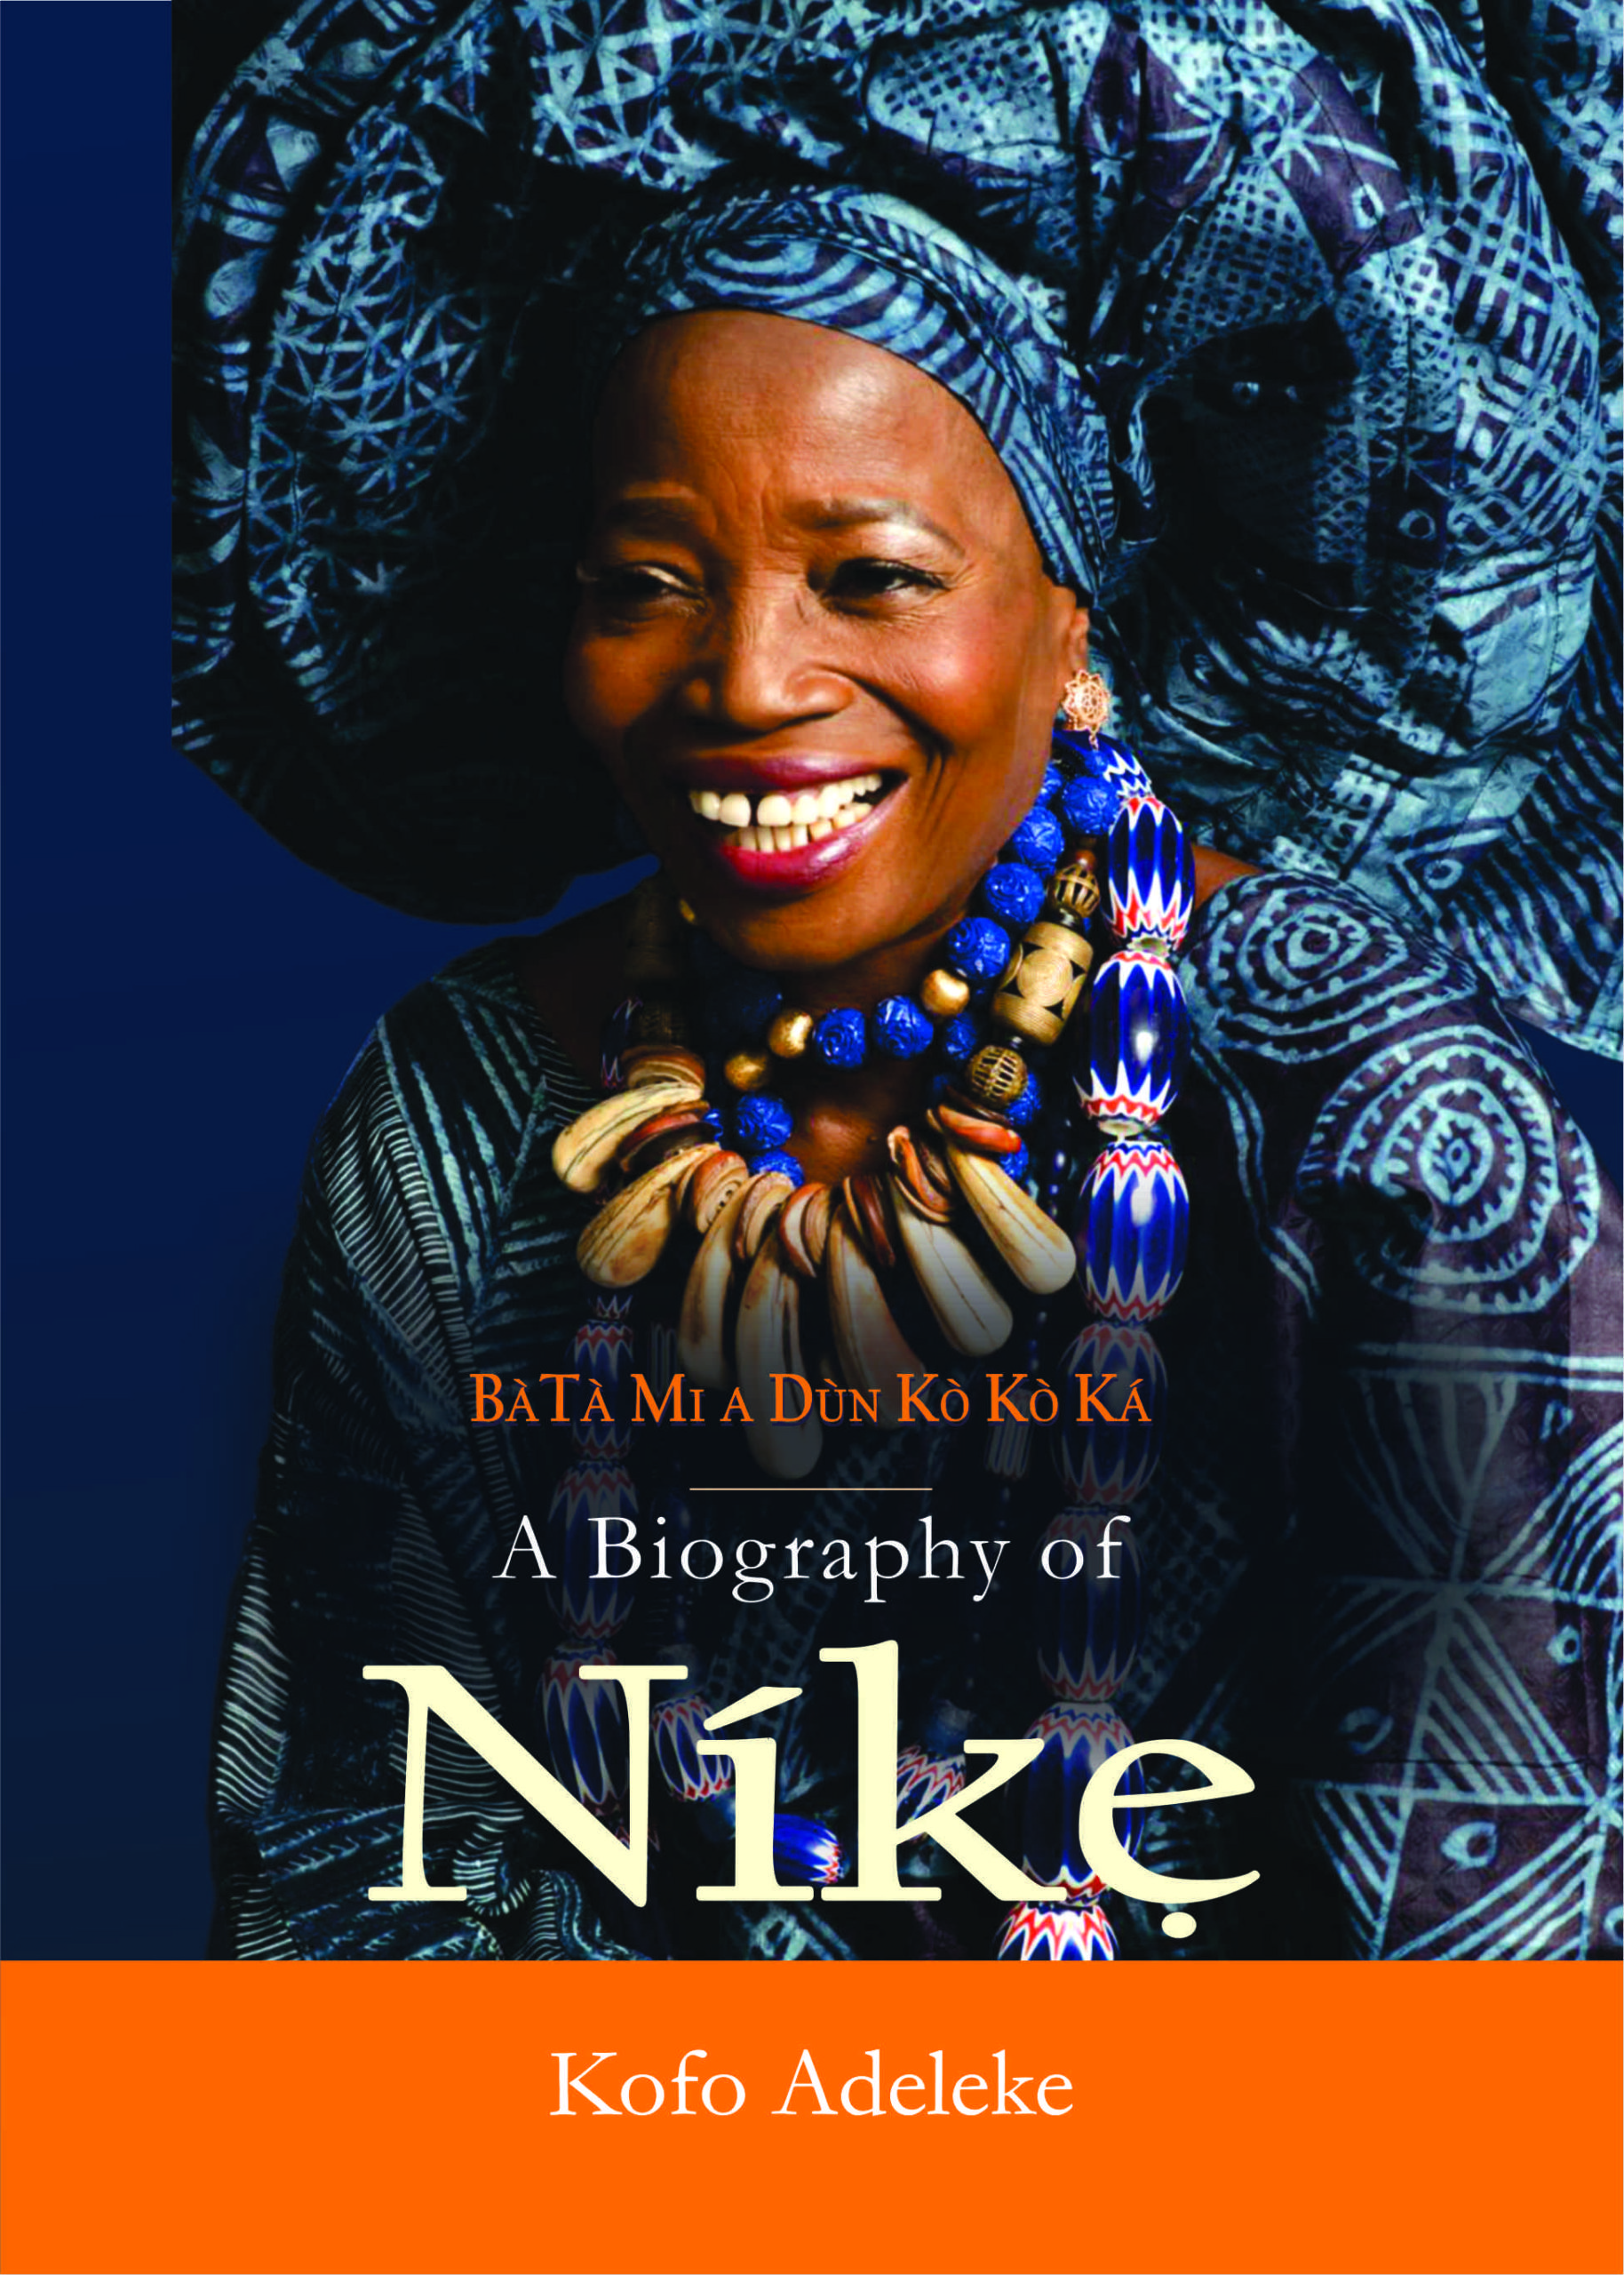 A BIOGRAPHICAL TRIBUTE TO NIKE, THE LADY OF THE ARTS